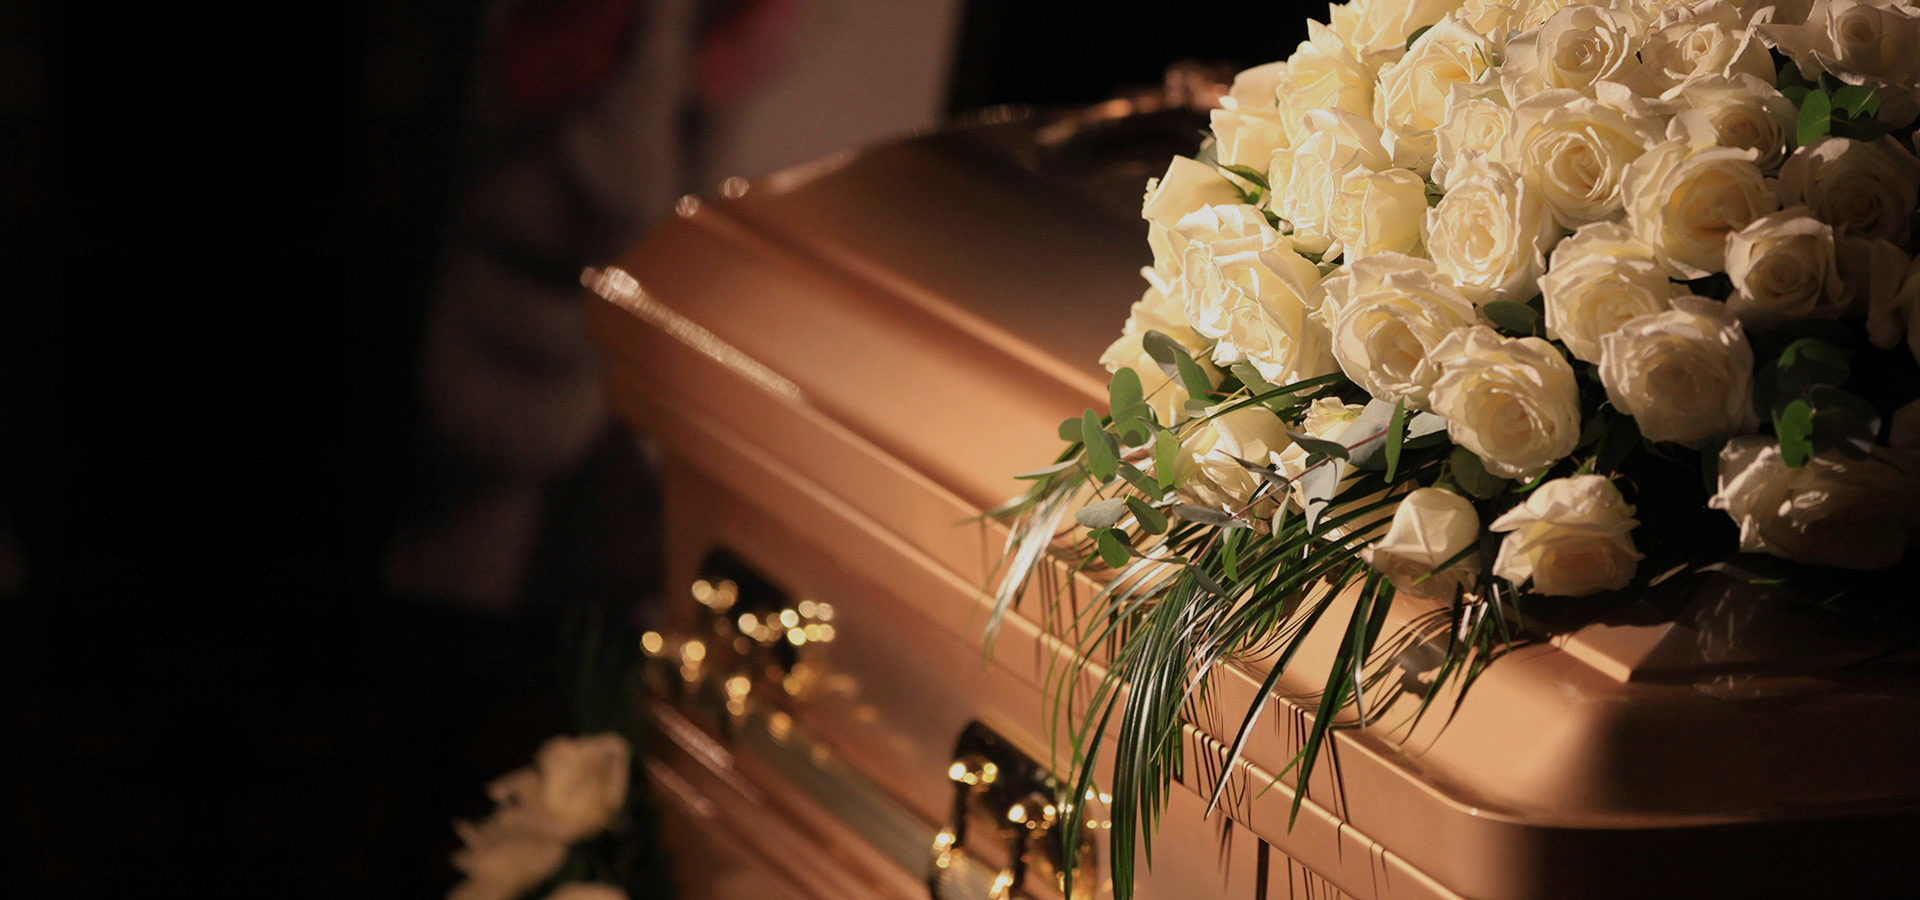 What Every Funeral Director Wants You to Know?